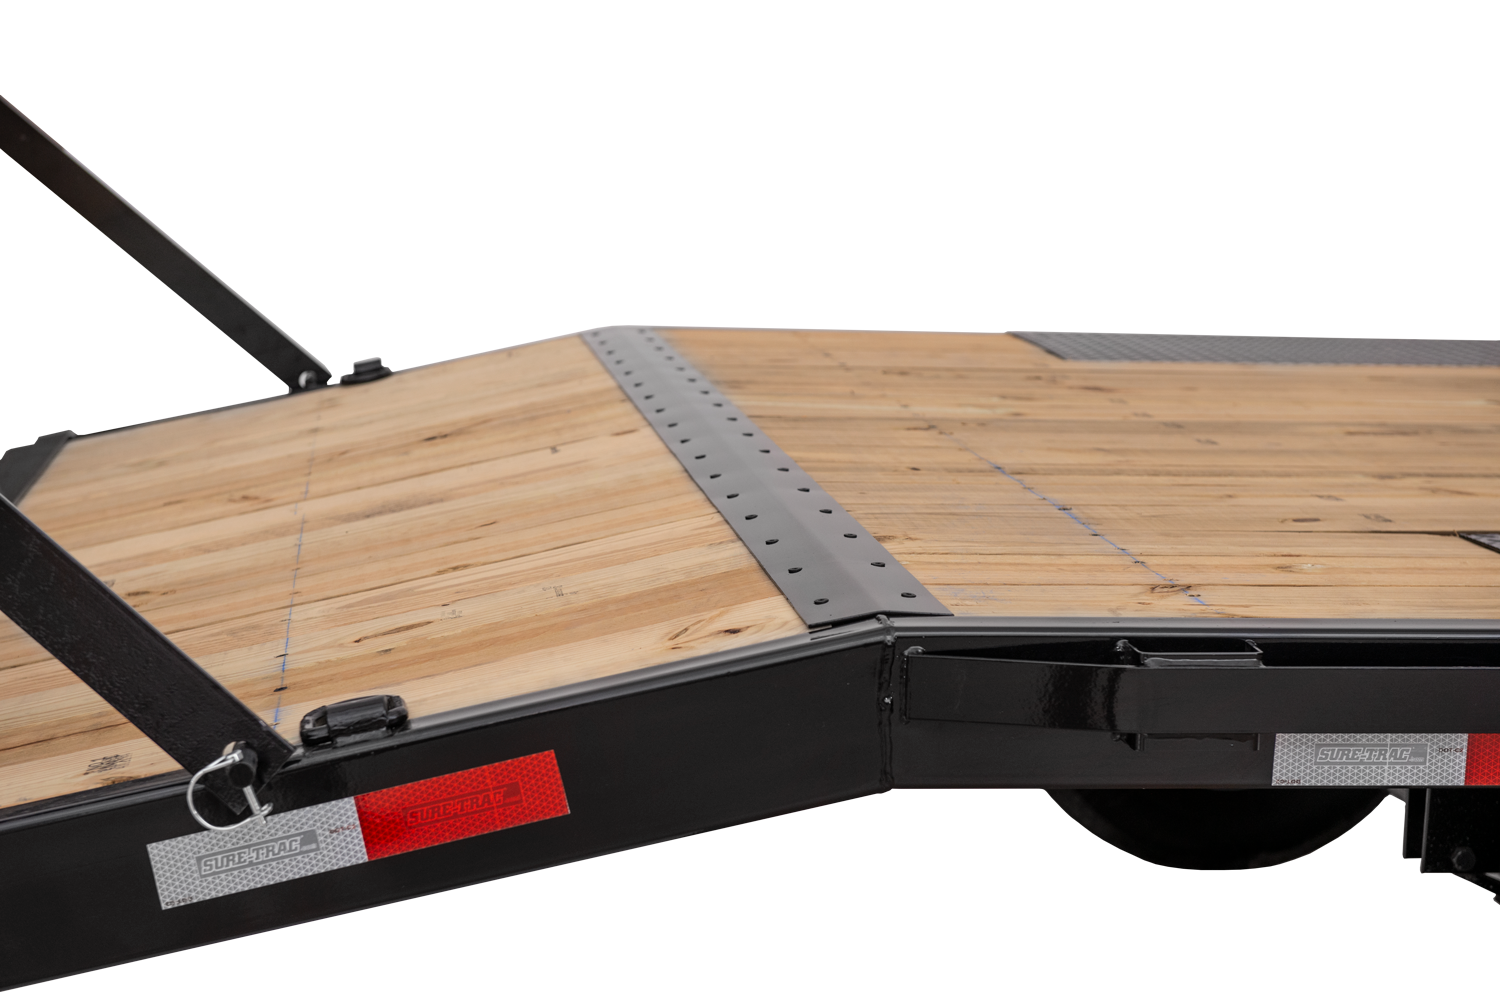 Sure-Trac | Low Profile Beavertail Deckover | Image | Back side, tilted, Low Profile Beavertail Deckover with reflective tape, beavertail down, close-up of beavertail transition